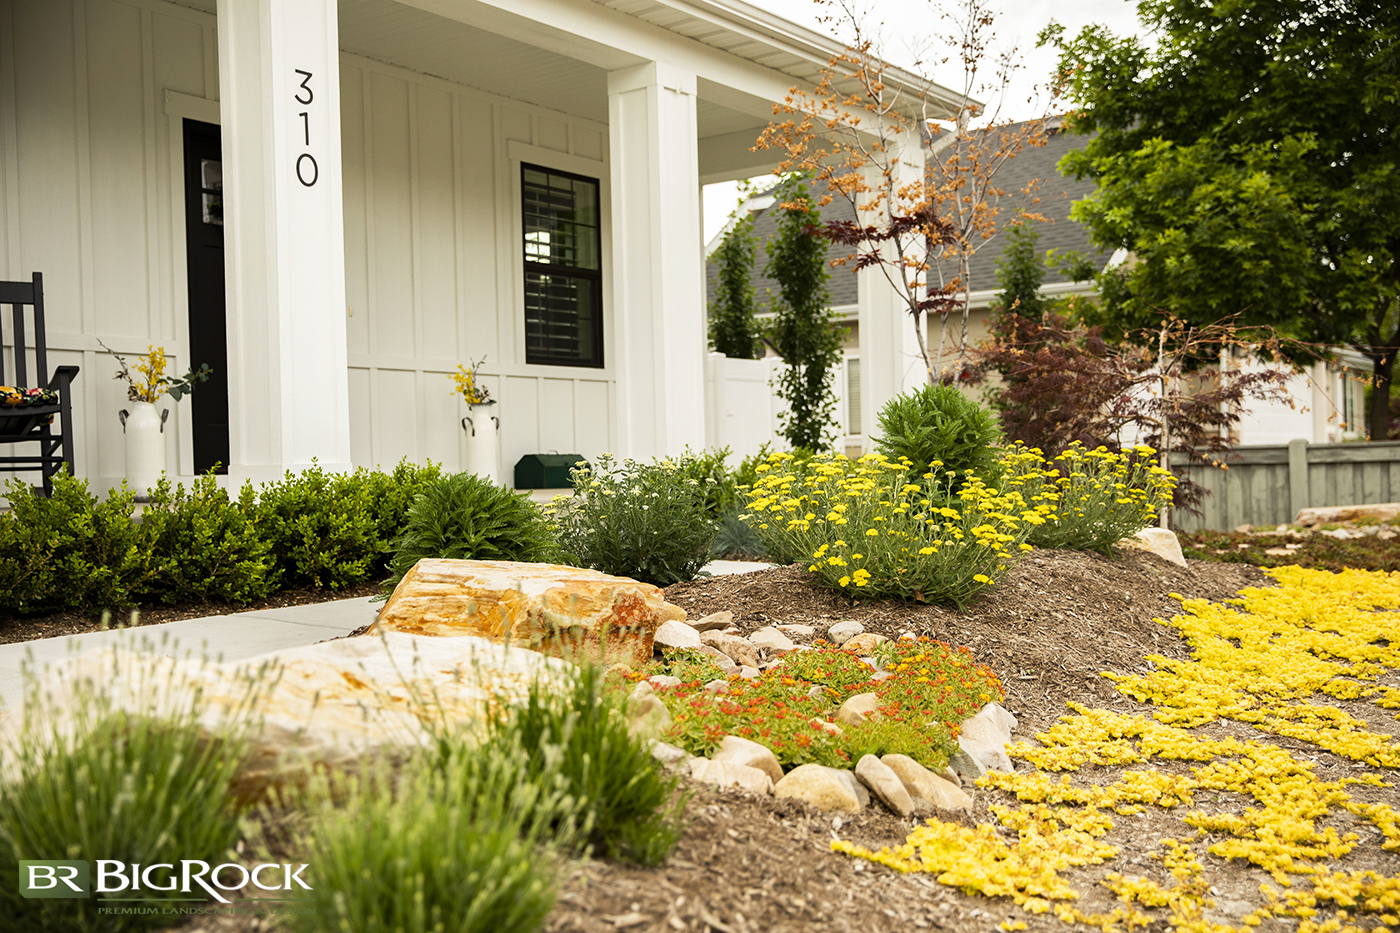 Don’t stand idly by while your landscaping takes a hit from terrible weather conditions this year. Check out Big Rock Landscaping’s checklist for how to help your yard during the drought and create your greenest, happiest yard yet!